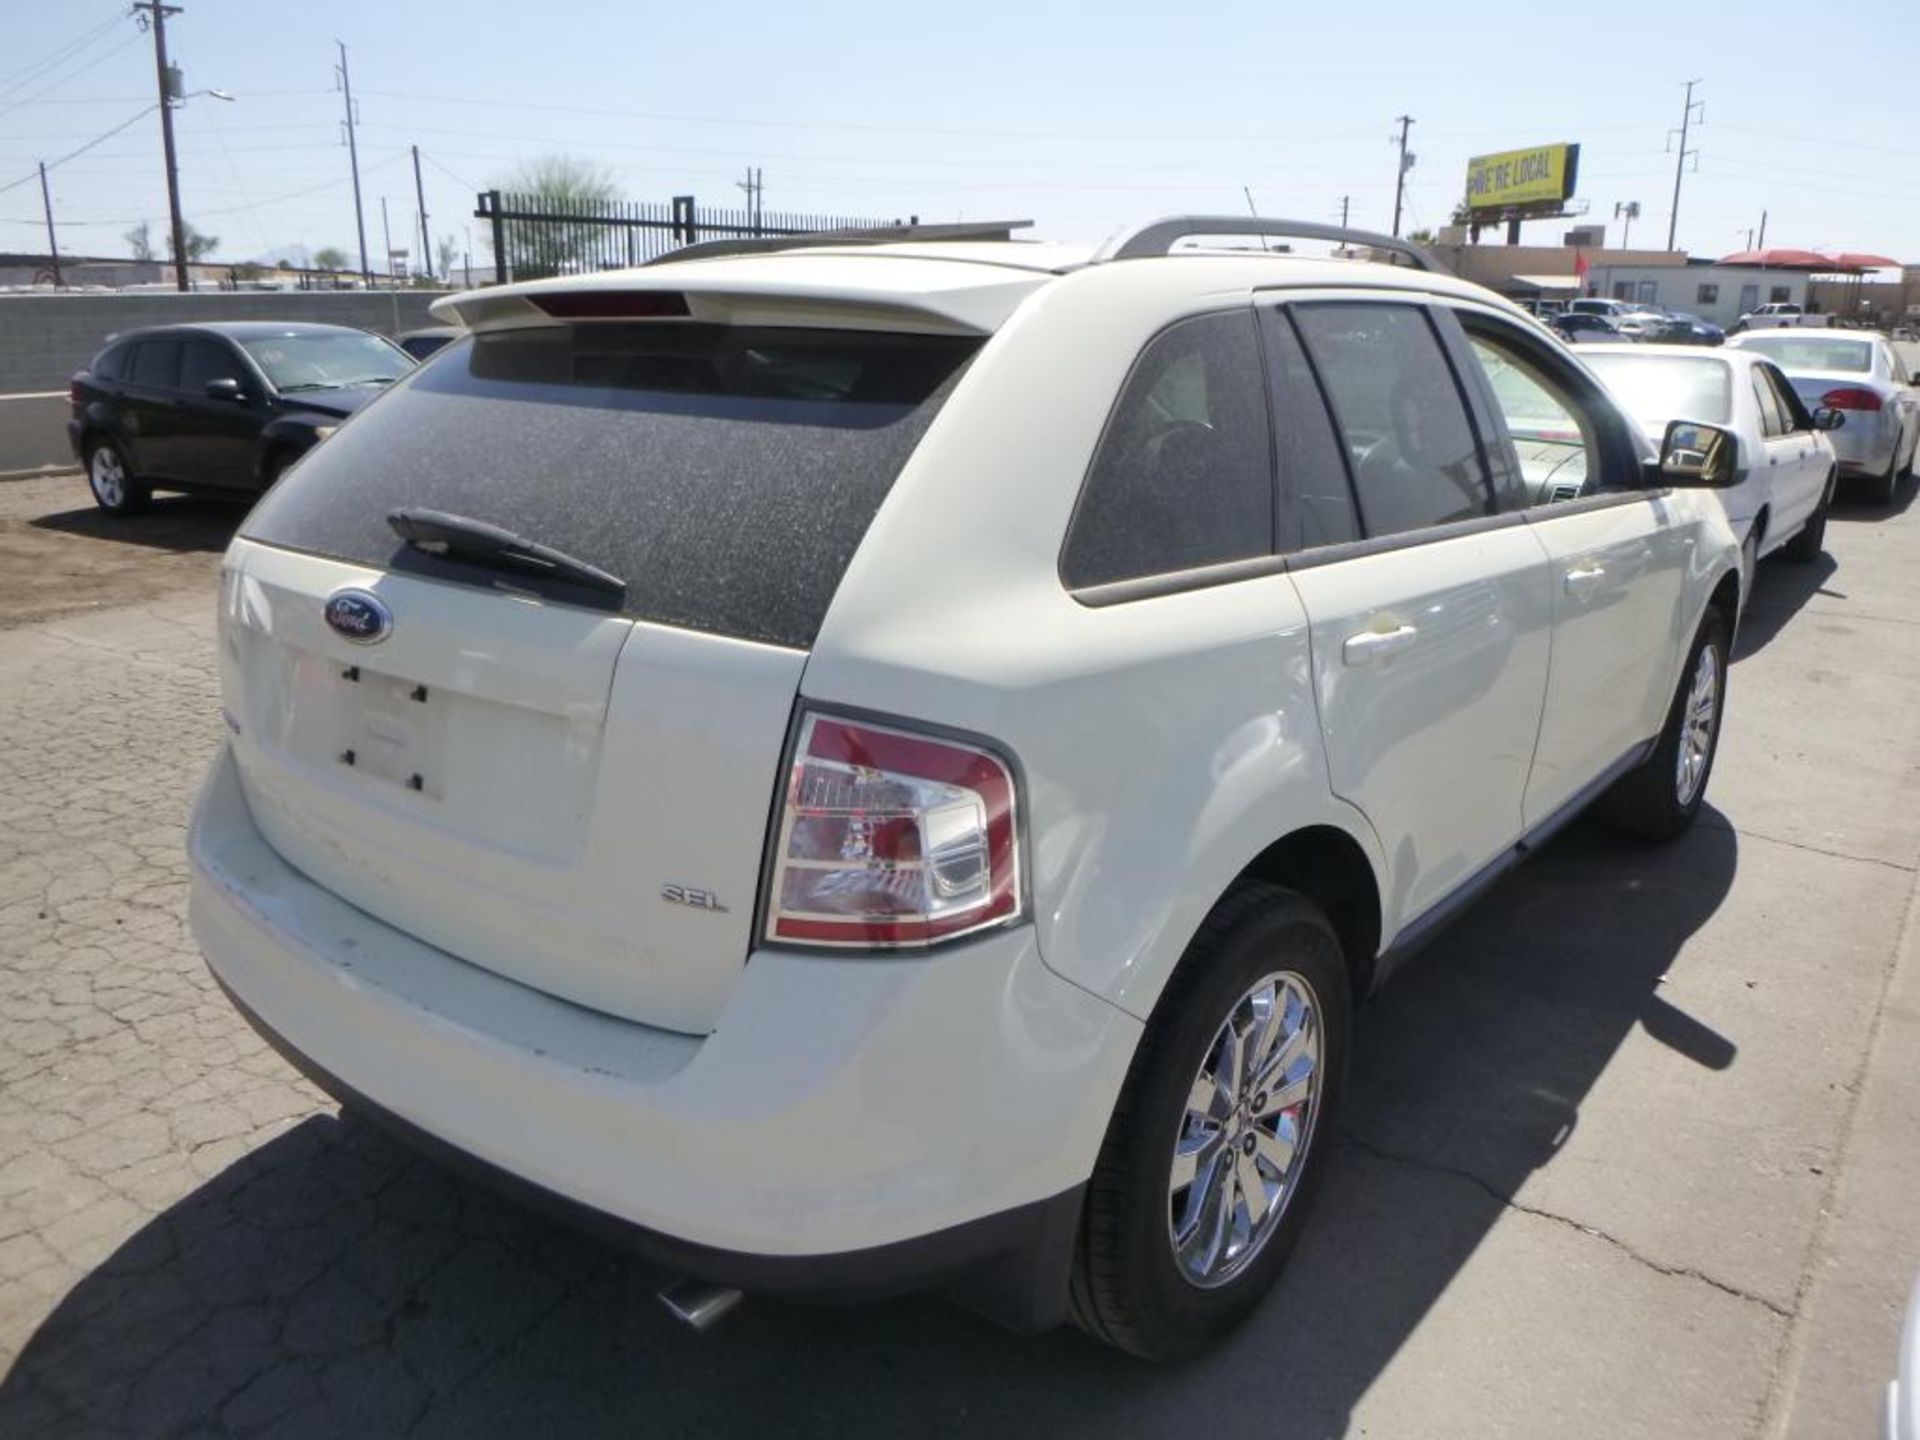 (Lot # 3309) 2007 Ford Edge - Image 3 of 13